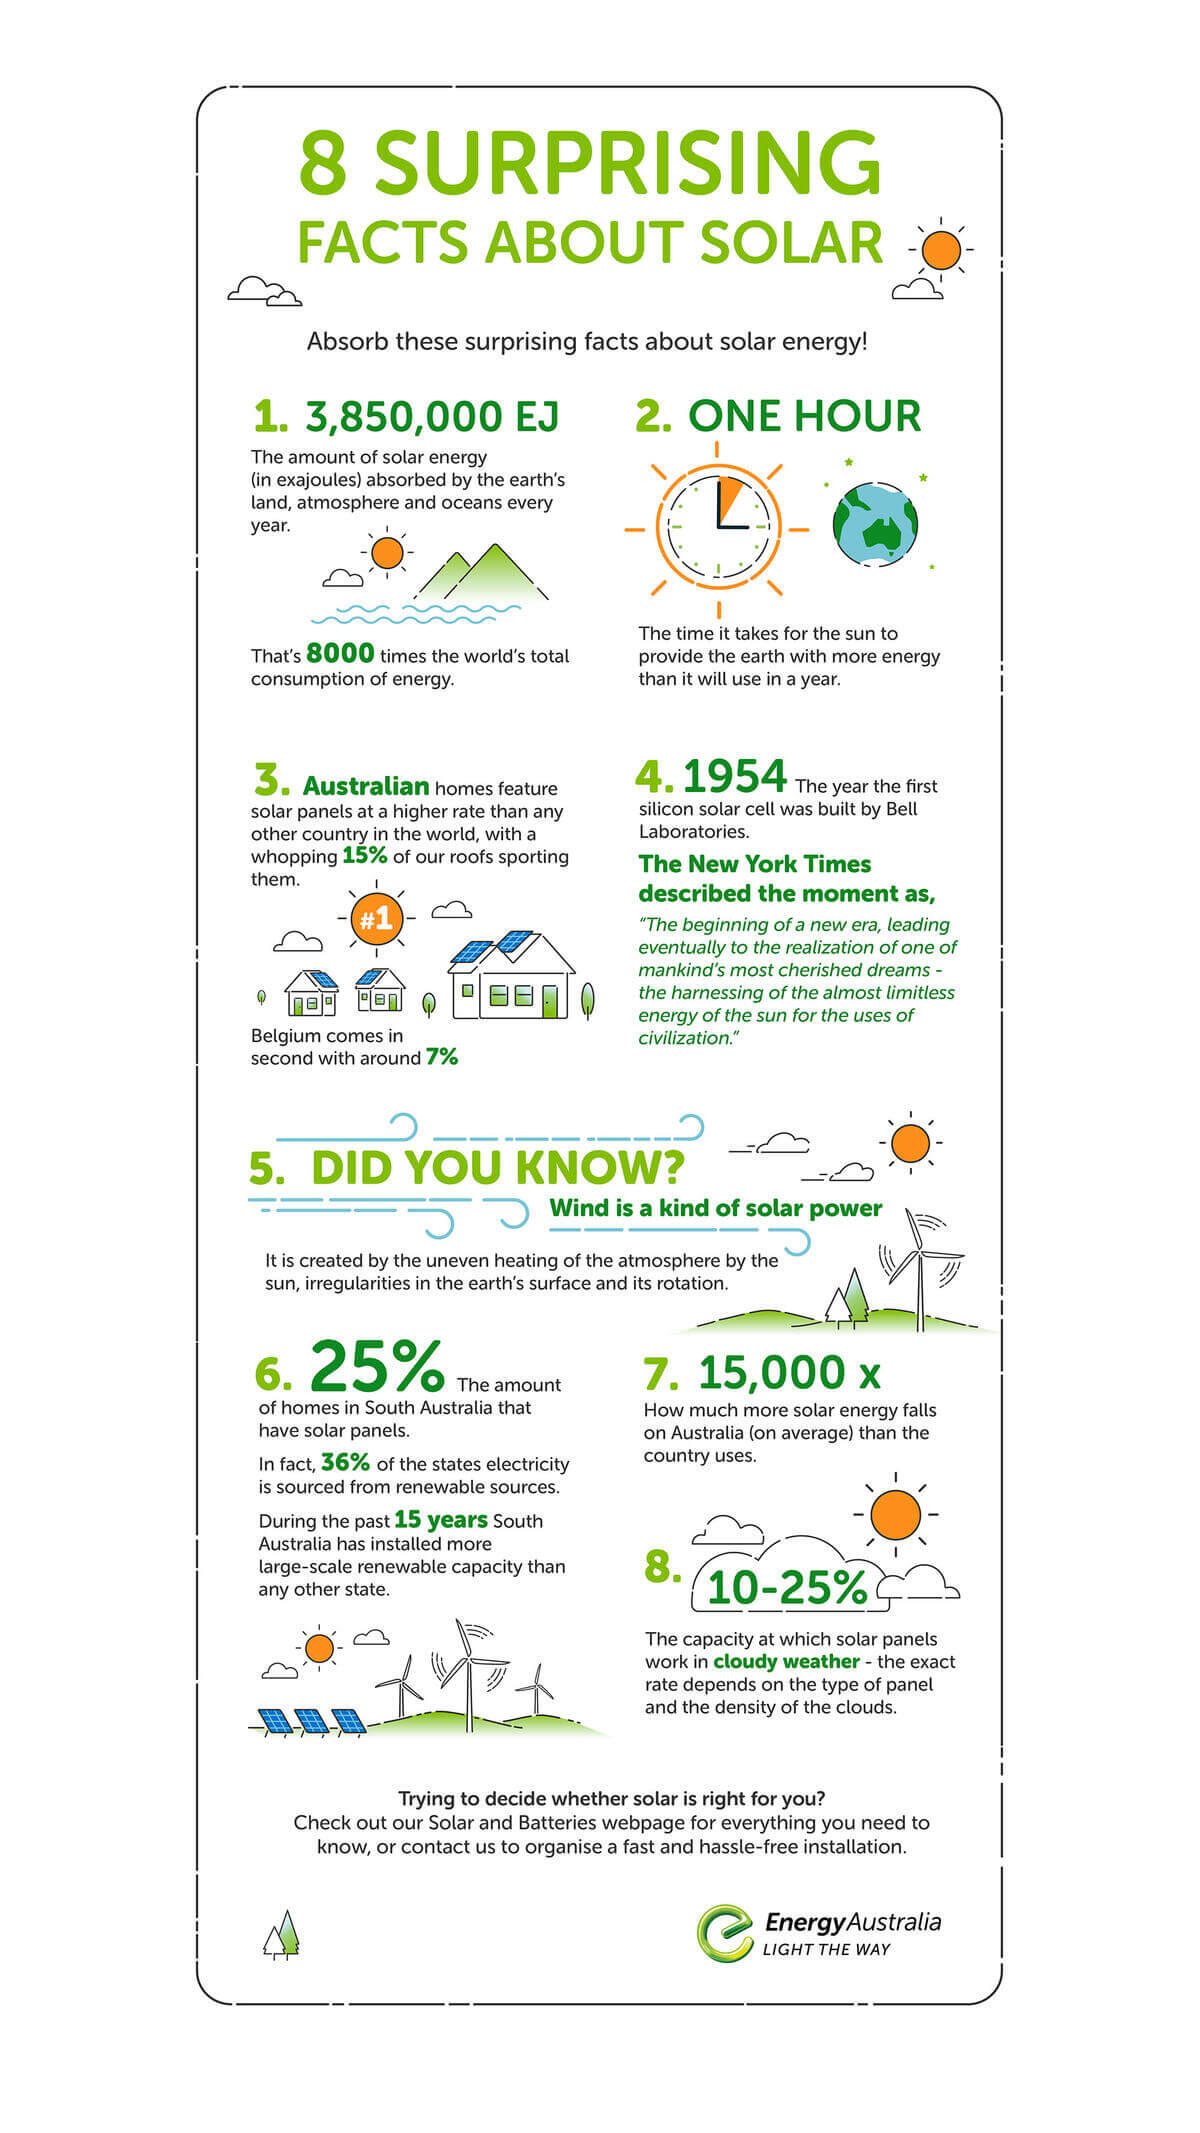  8 surprising facts about solar energy technology | EnergyAustralia